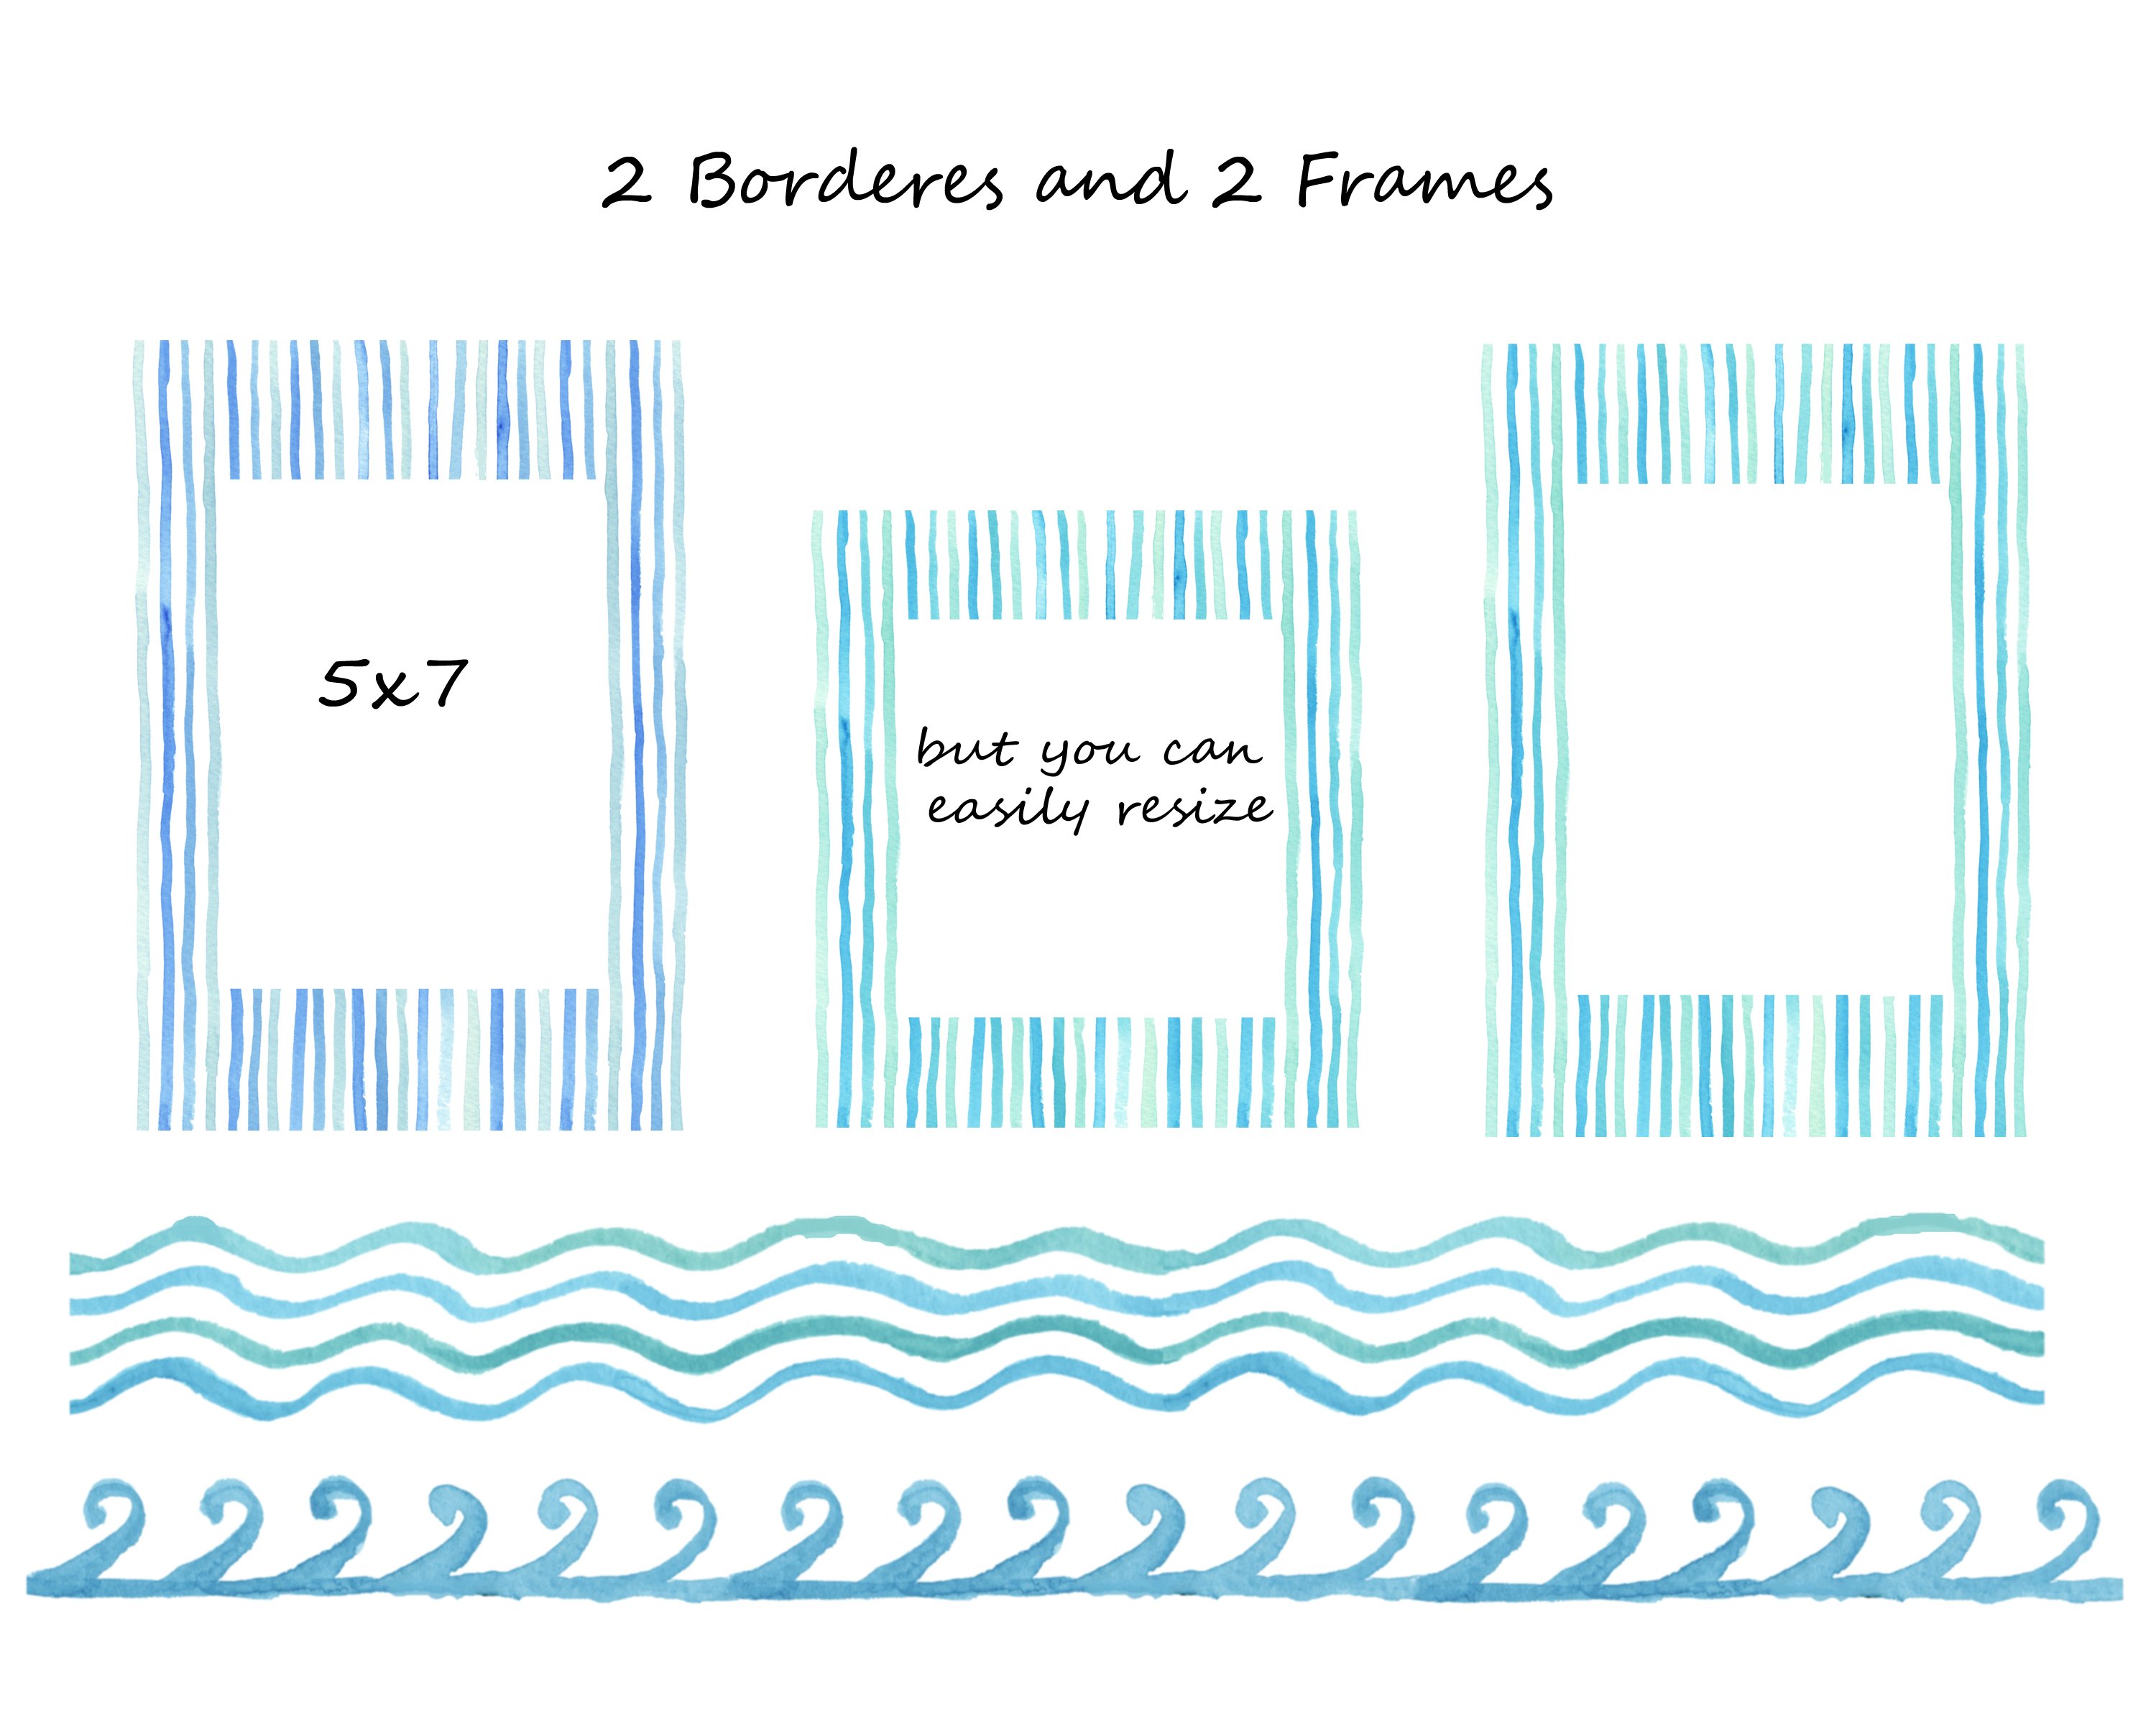 borders and frames elements sheet 927